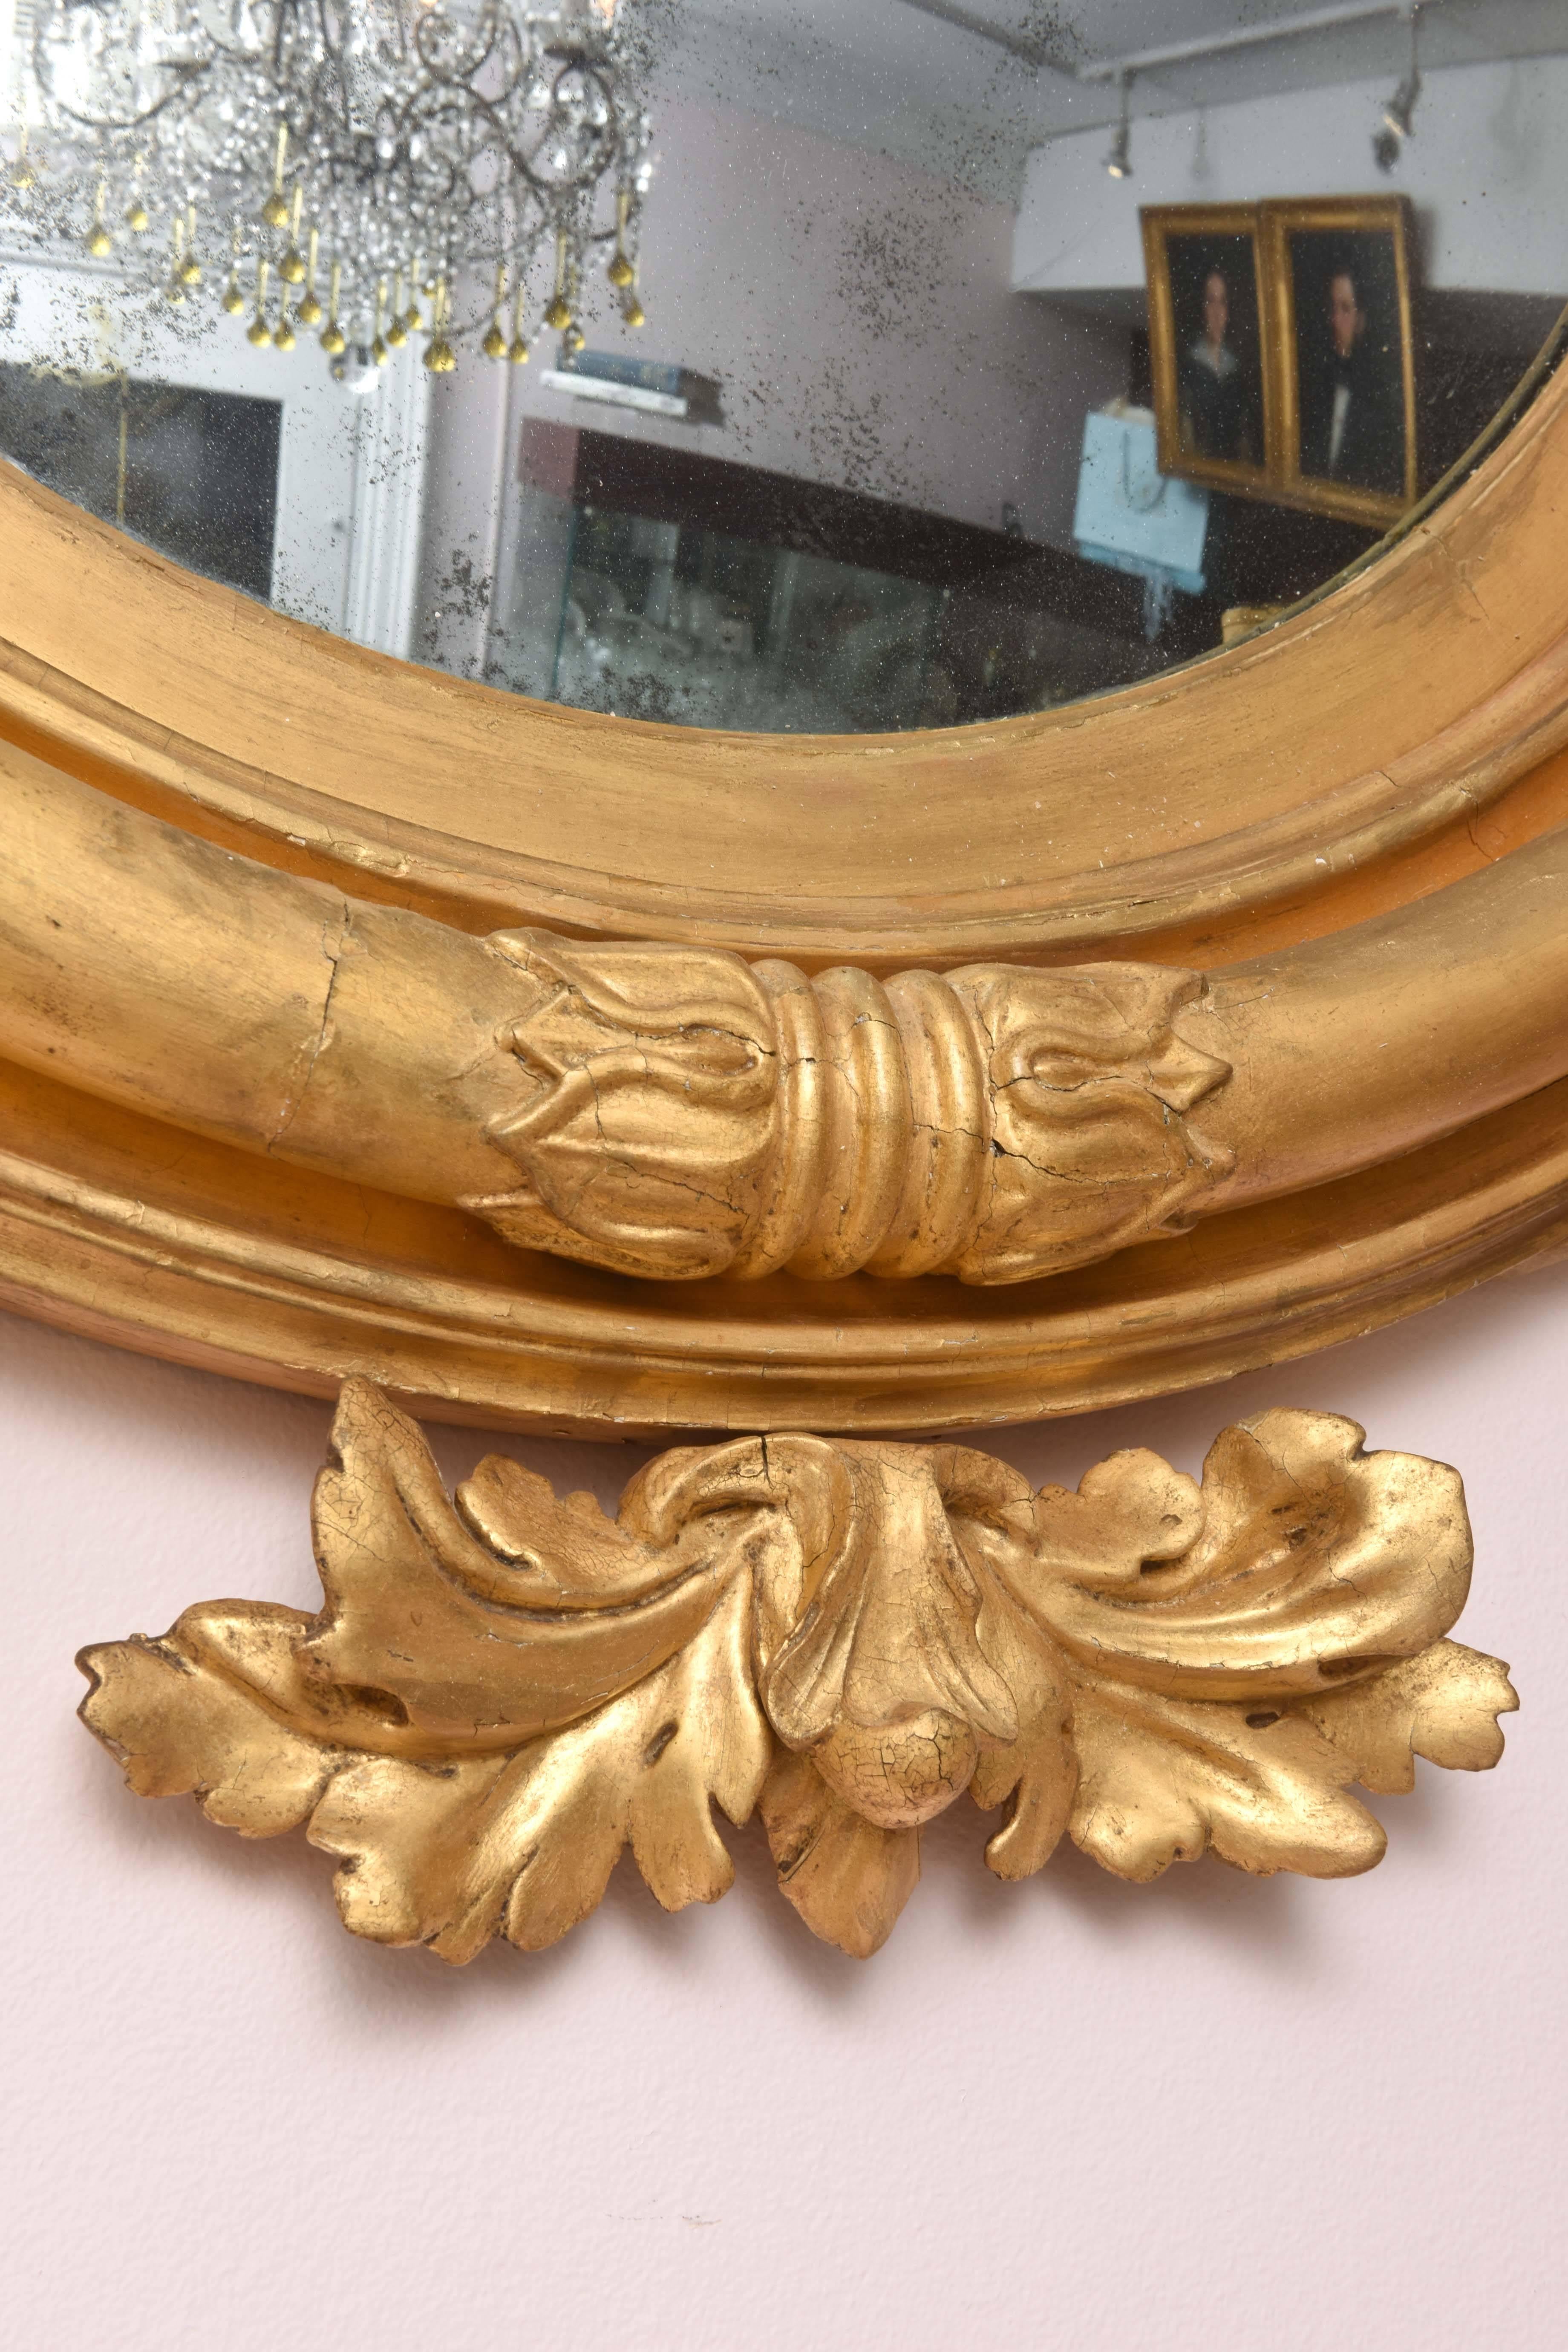 Gold Leaf Authentic Antique Regency Period Mirror, Carved Wood, Heavily Gilded, circa 1820